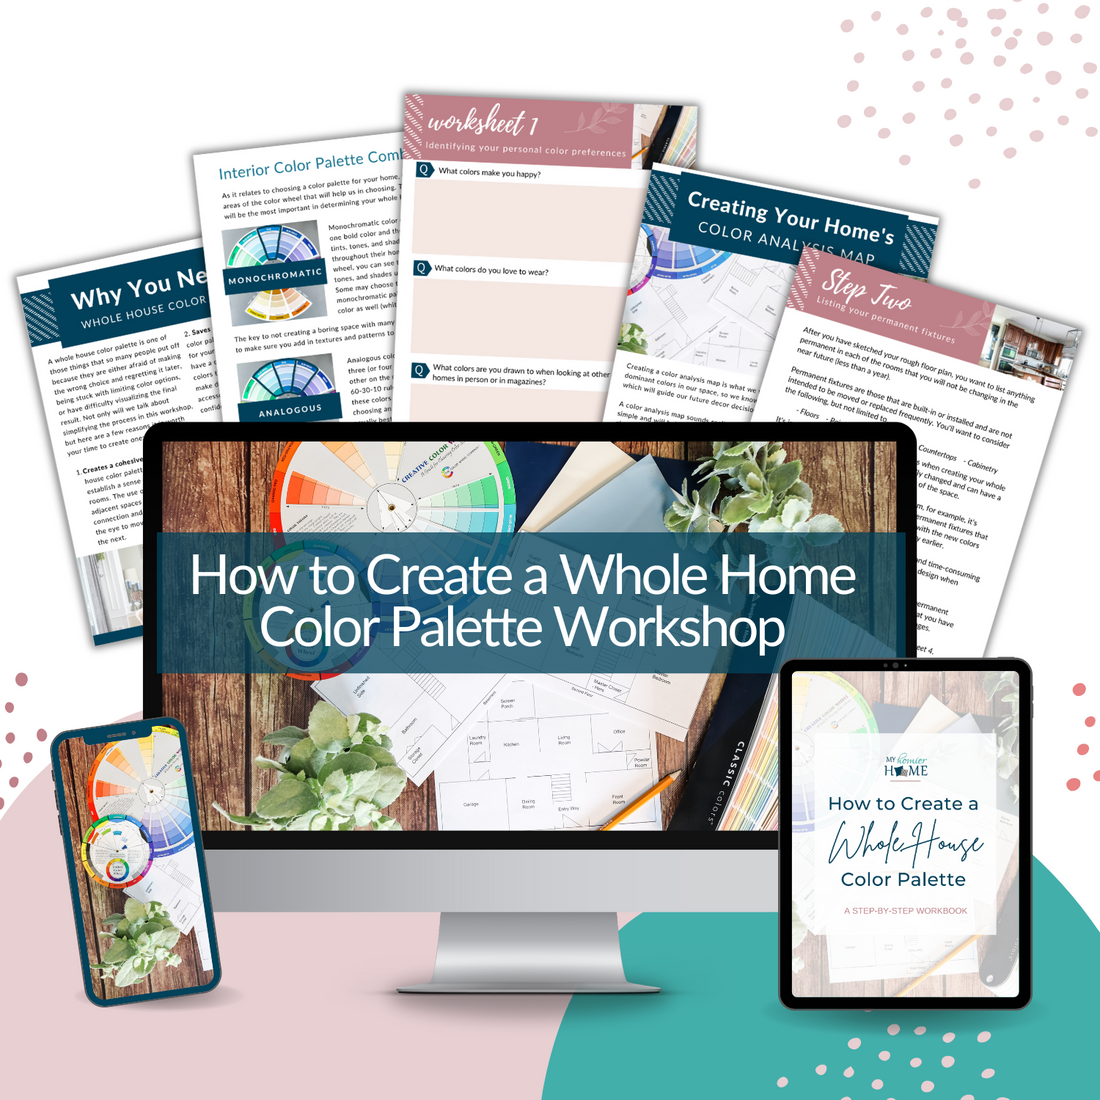 In this My Homier Home workshop, you will learn how to create a cohesive color scheme for your whole home. We will explore the concept of color coordination and teach you techniques to develop a stunning whole home color palette in the How to Create a Whole Home Color Palette Workshop.